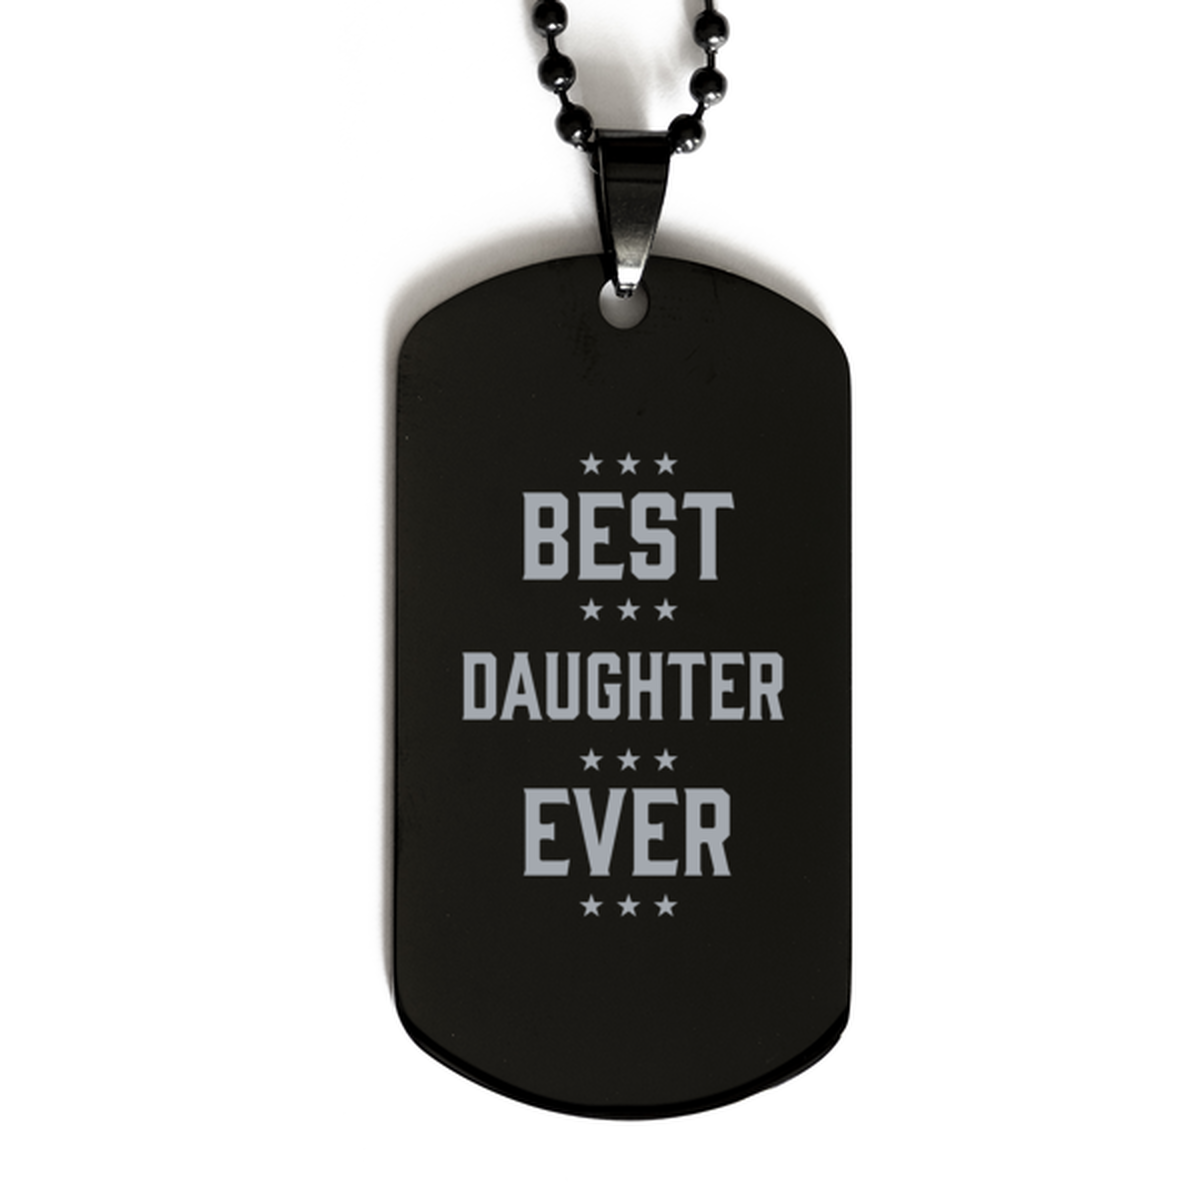 Best Daughter Ever Daughter Gifts, Funny Black Dog Tag For Daughter, Birthday Family Presents Engraved Necklace For Men